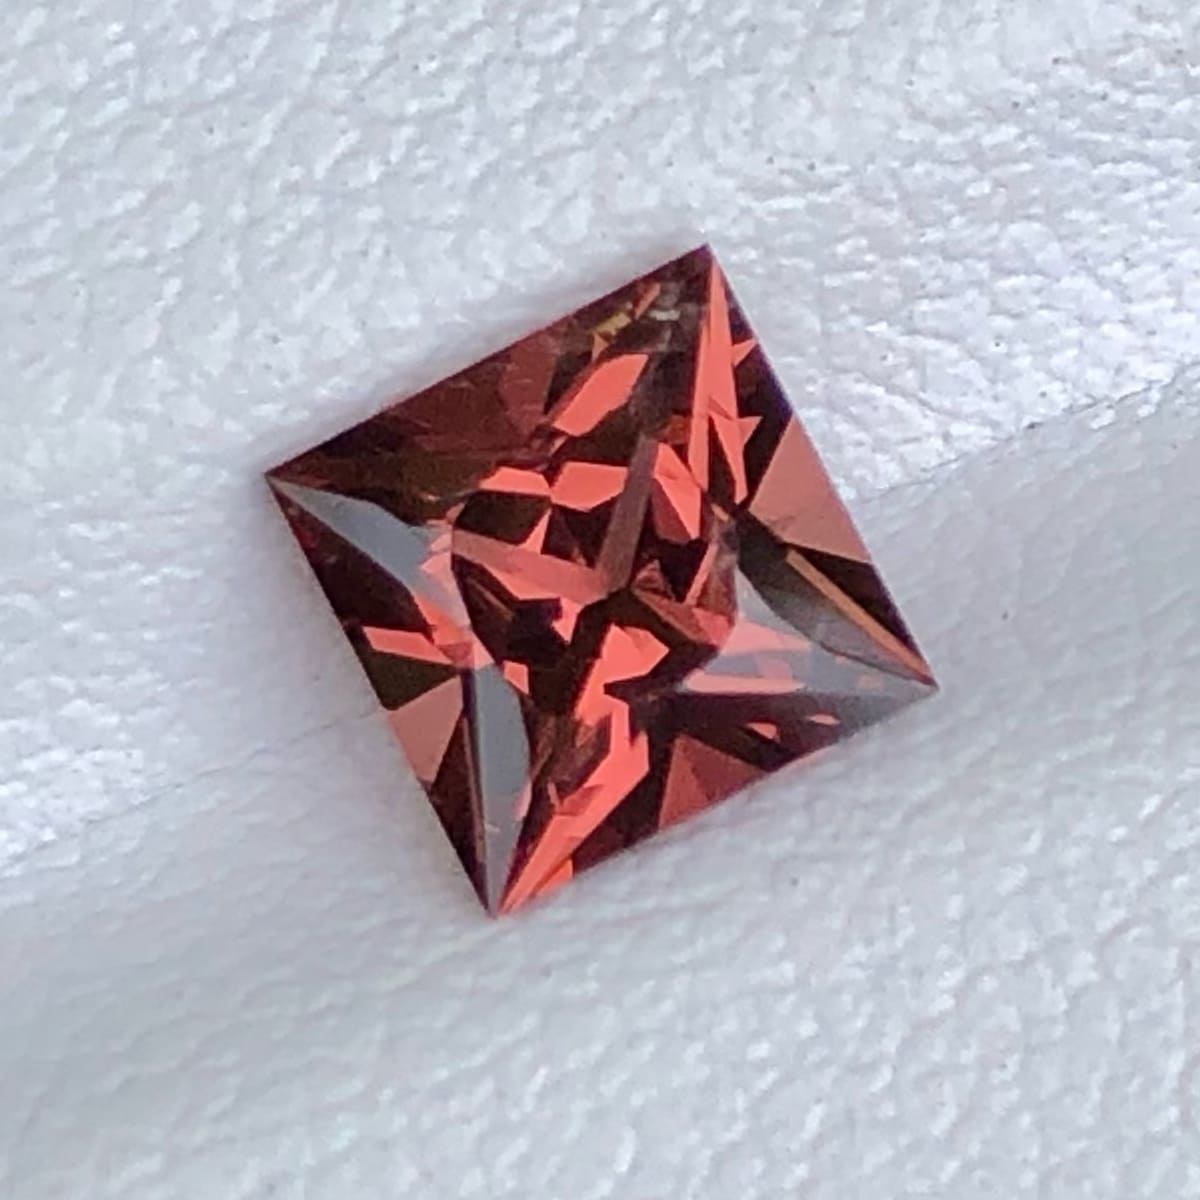 Buy 1.23 Carats Faceted Carmine Pink Spinel